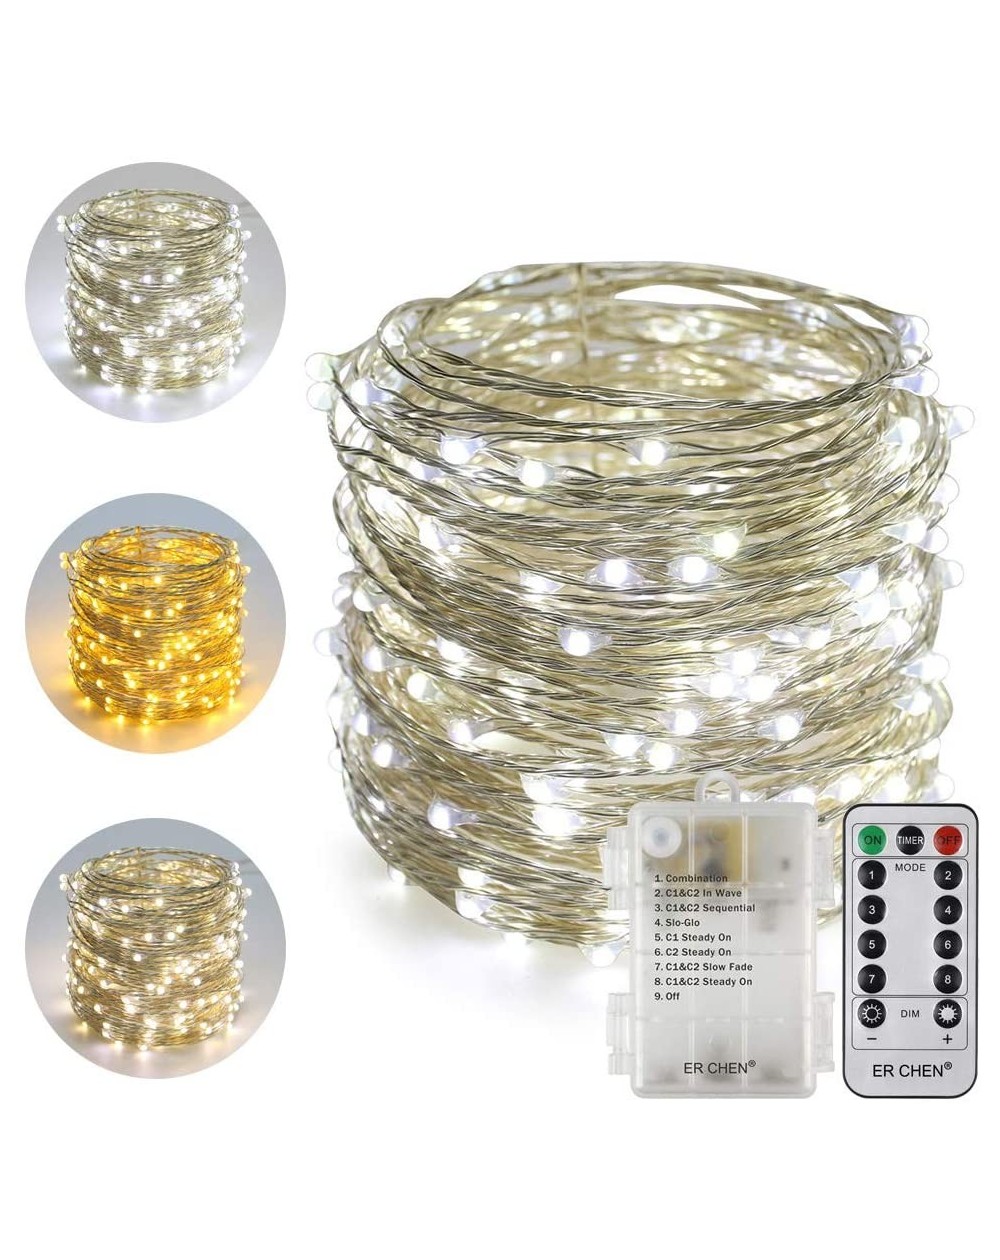 Indoor String Lights Dual-Color Battery Operated Led String Lights- 66 FT 200 LEDs Color Changing Silvery Copper Wire Dimmabl...